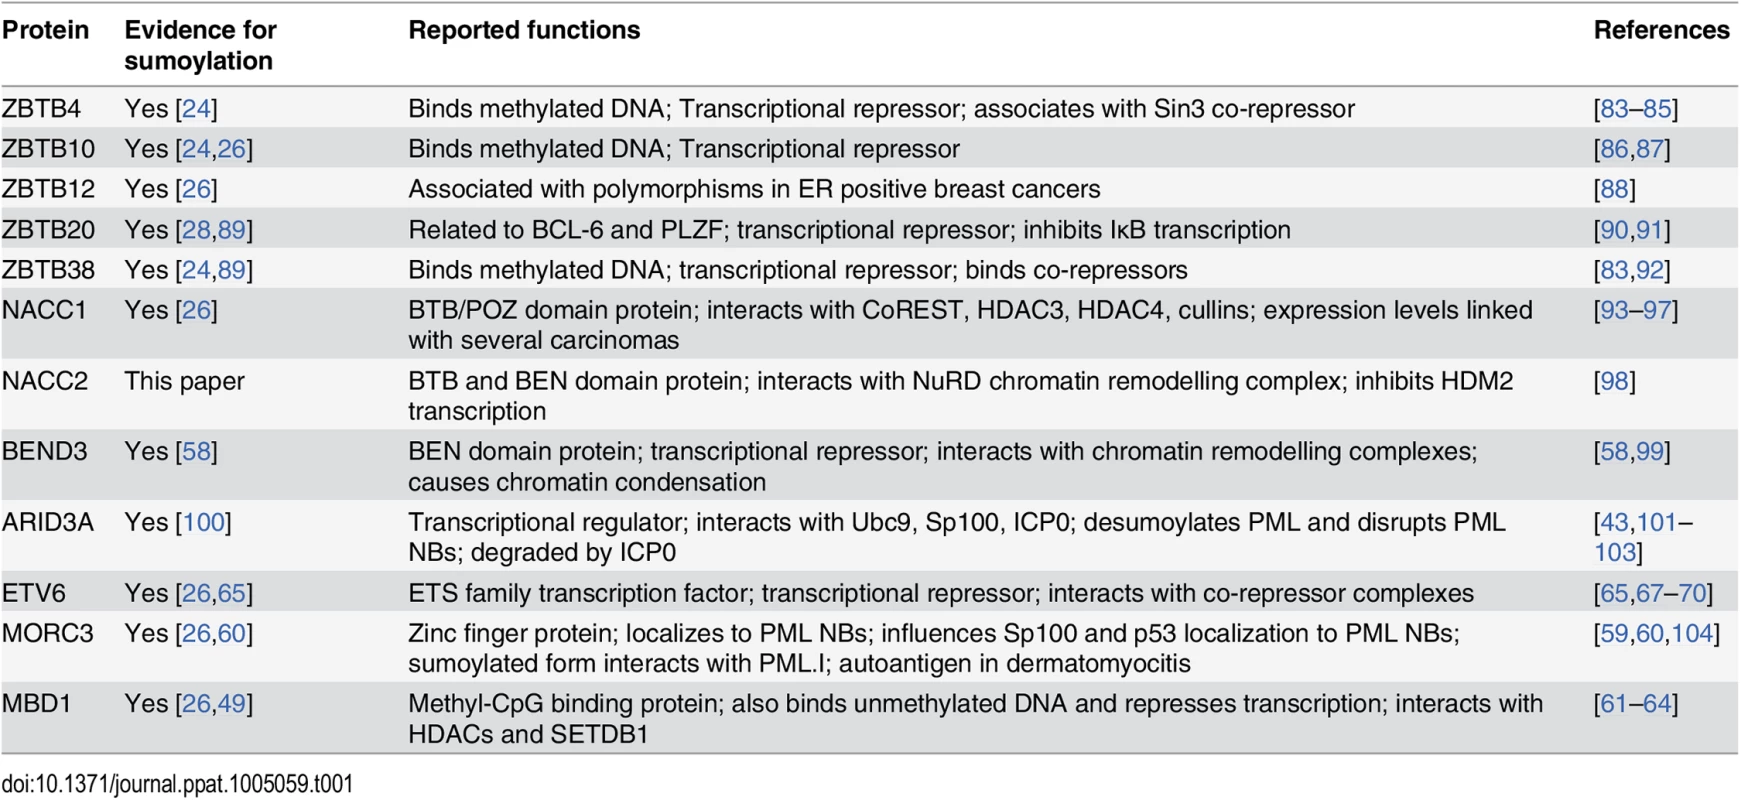 Brief information on sumoylated proteins validated in this study.